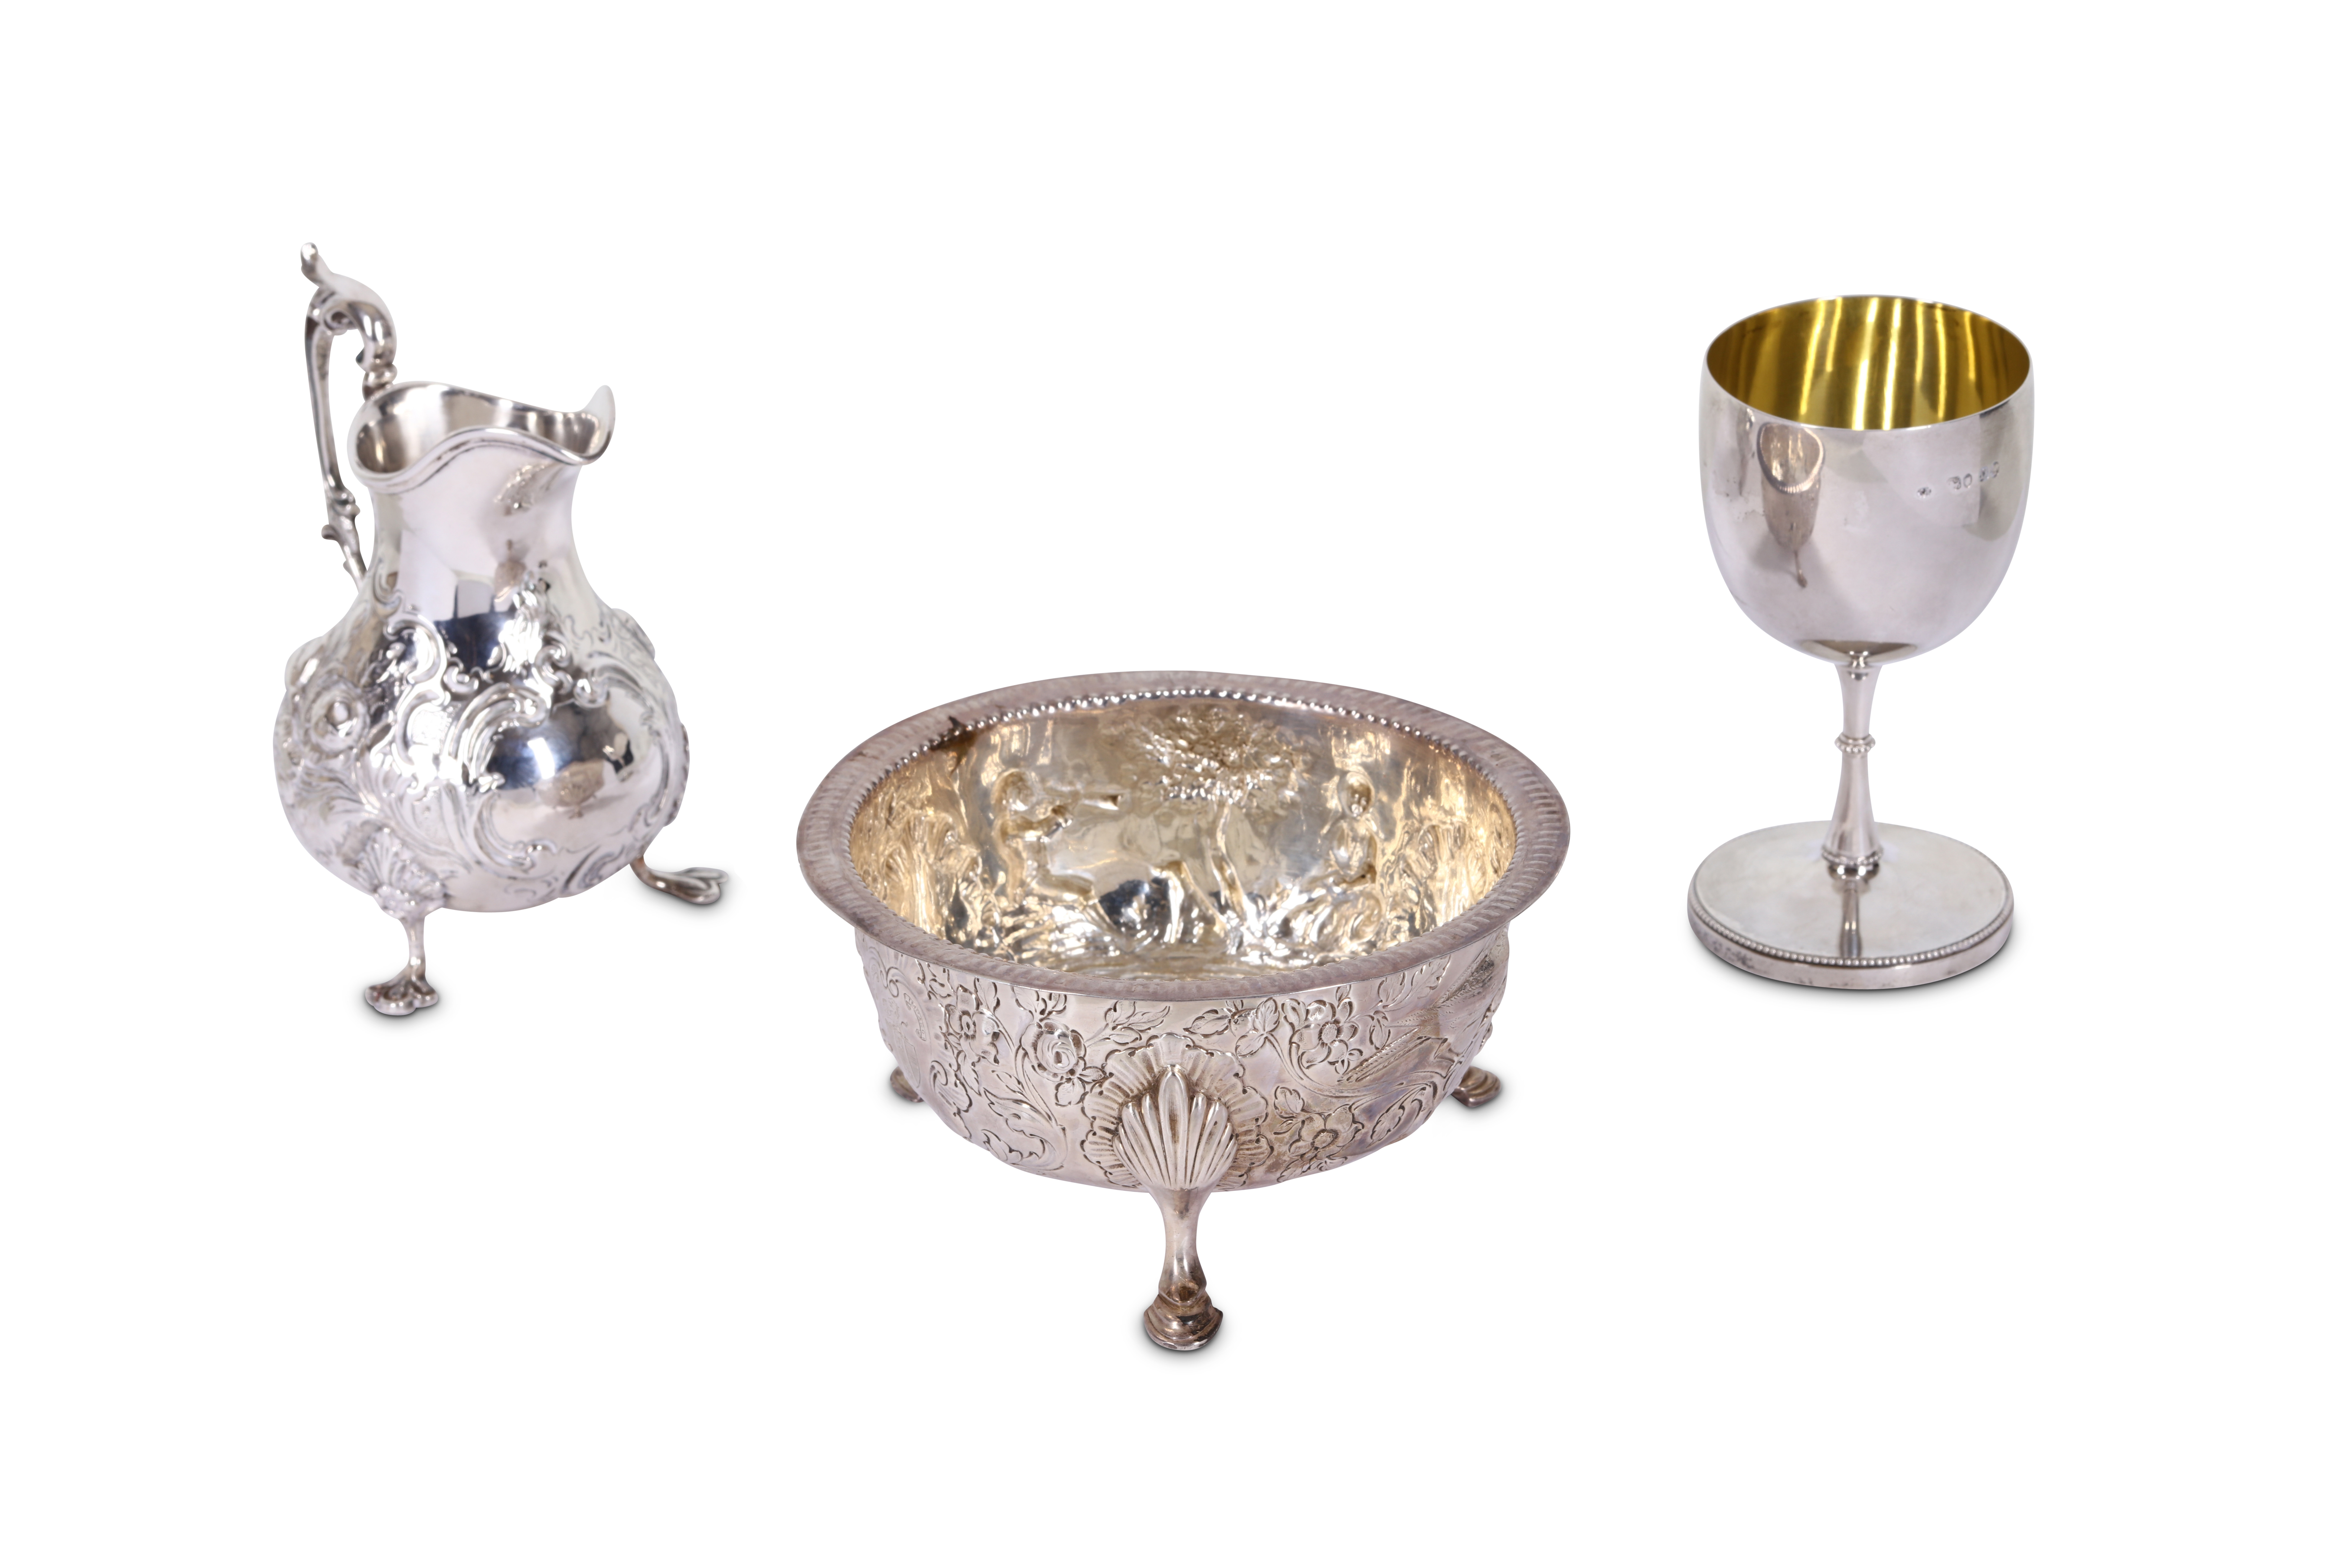 A mixed group of Victorian antique sterling silver, including a sherry goblet London 1869 by Thomas